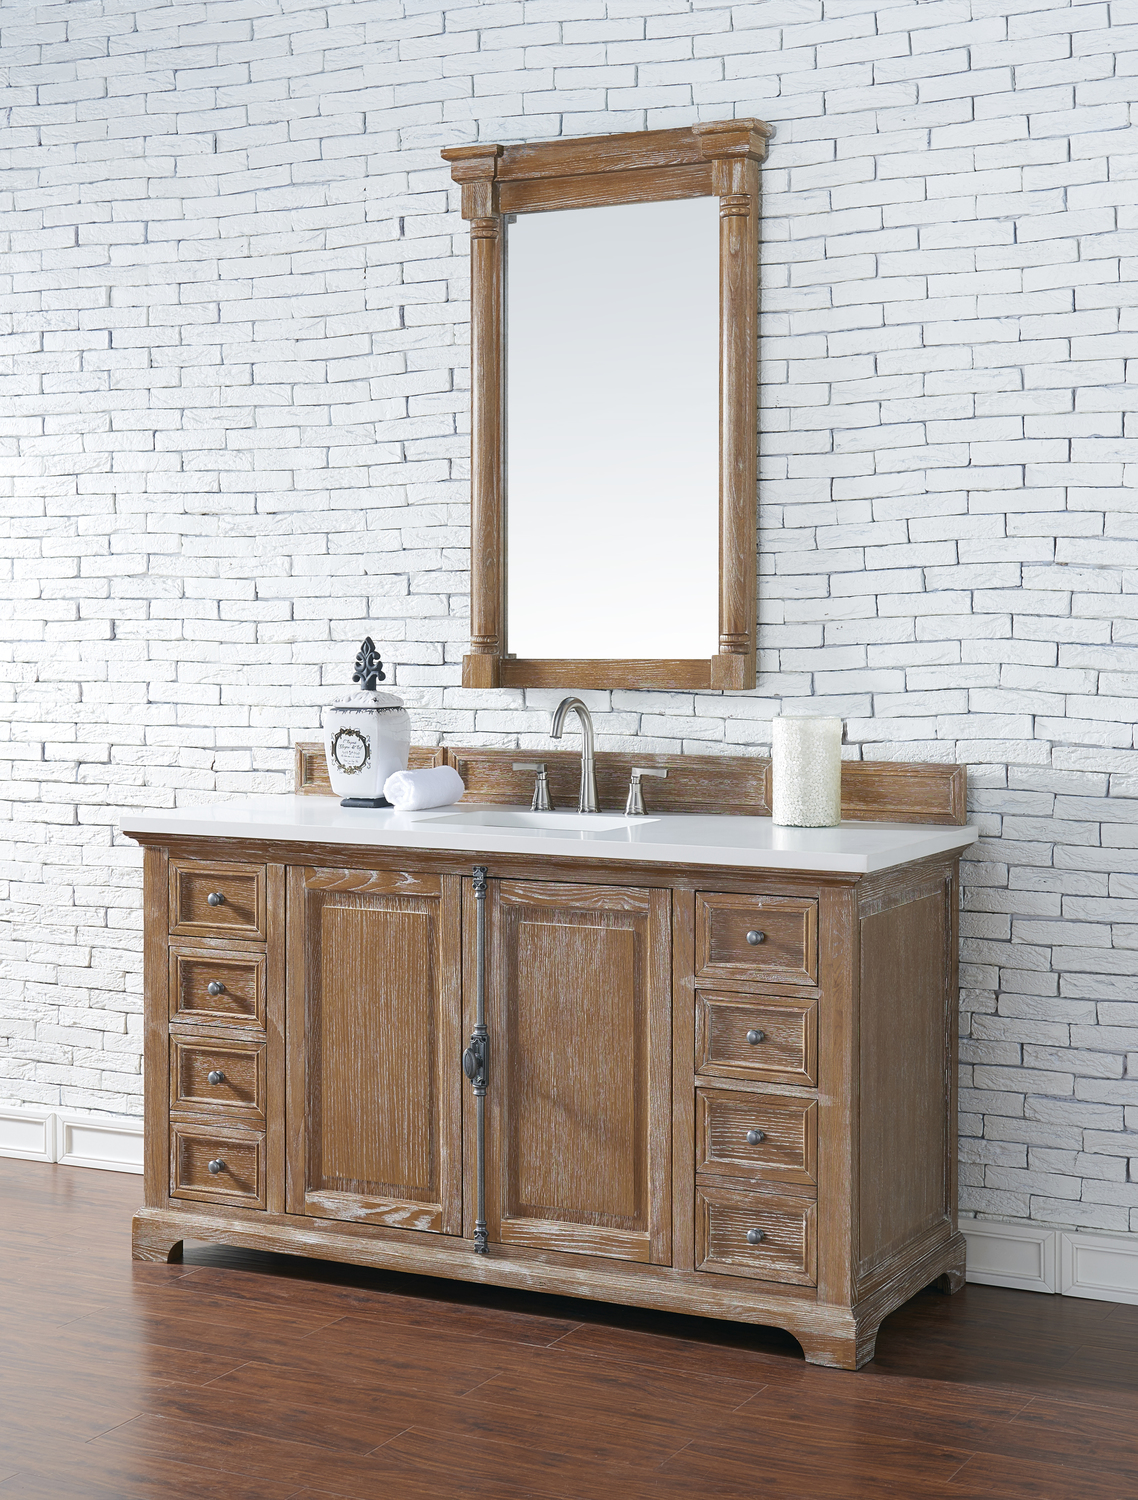 vanity and sink unit James Martin Vanity Driftwood Transitional